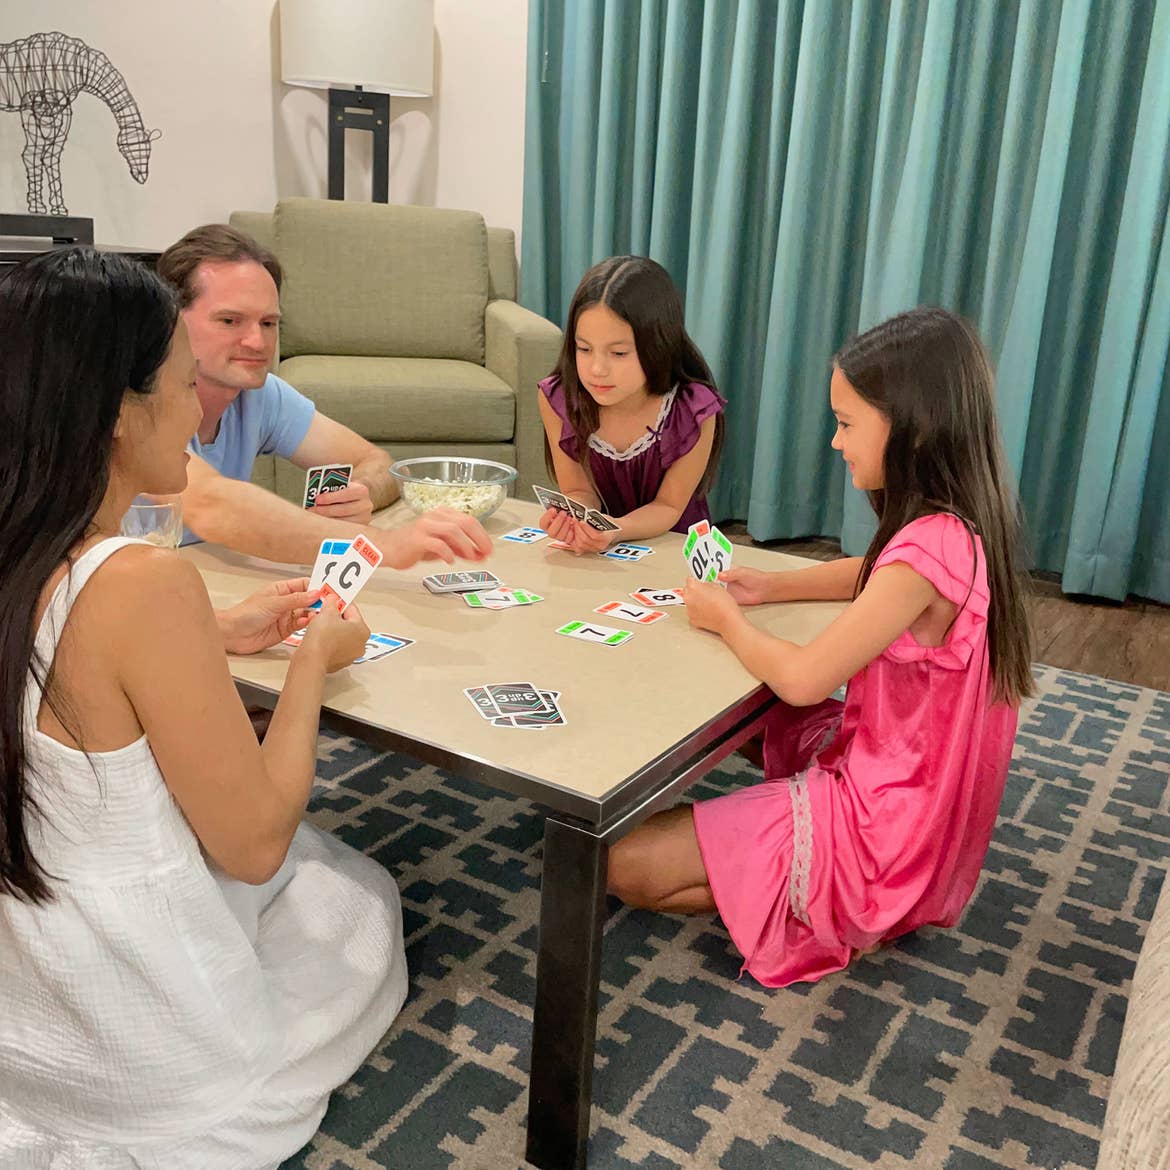 (From left to right) A woman, man and two young girls play a card game while kneeling near a coffee table and green chair indoors.